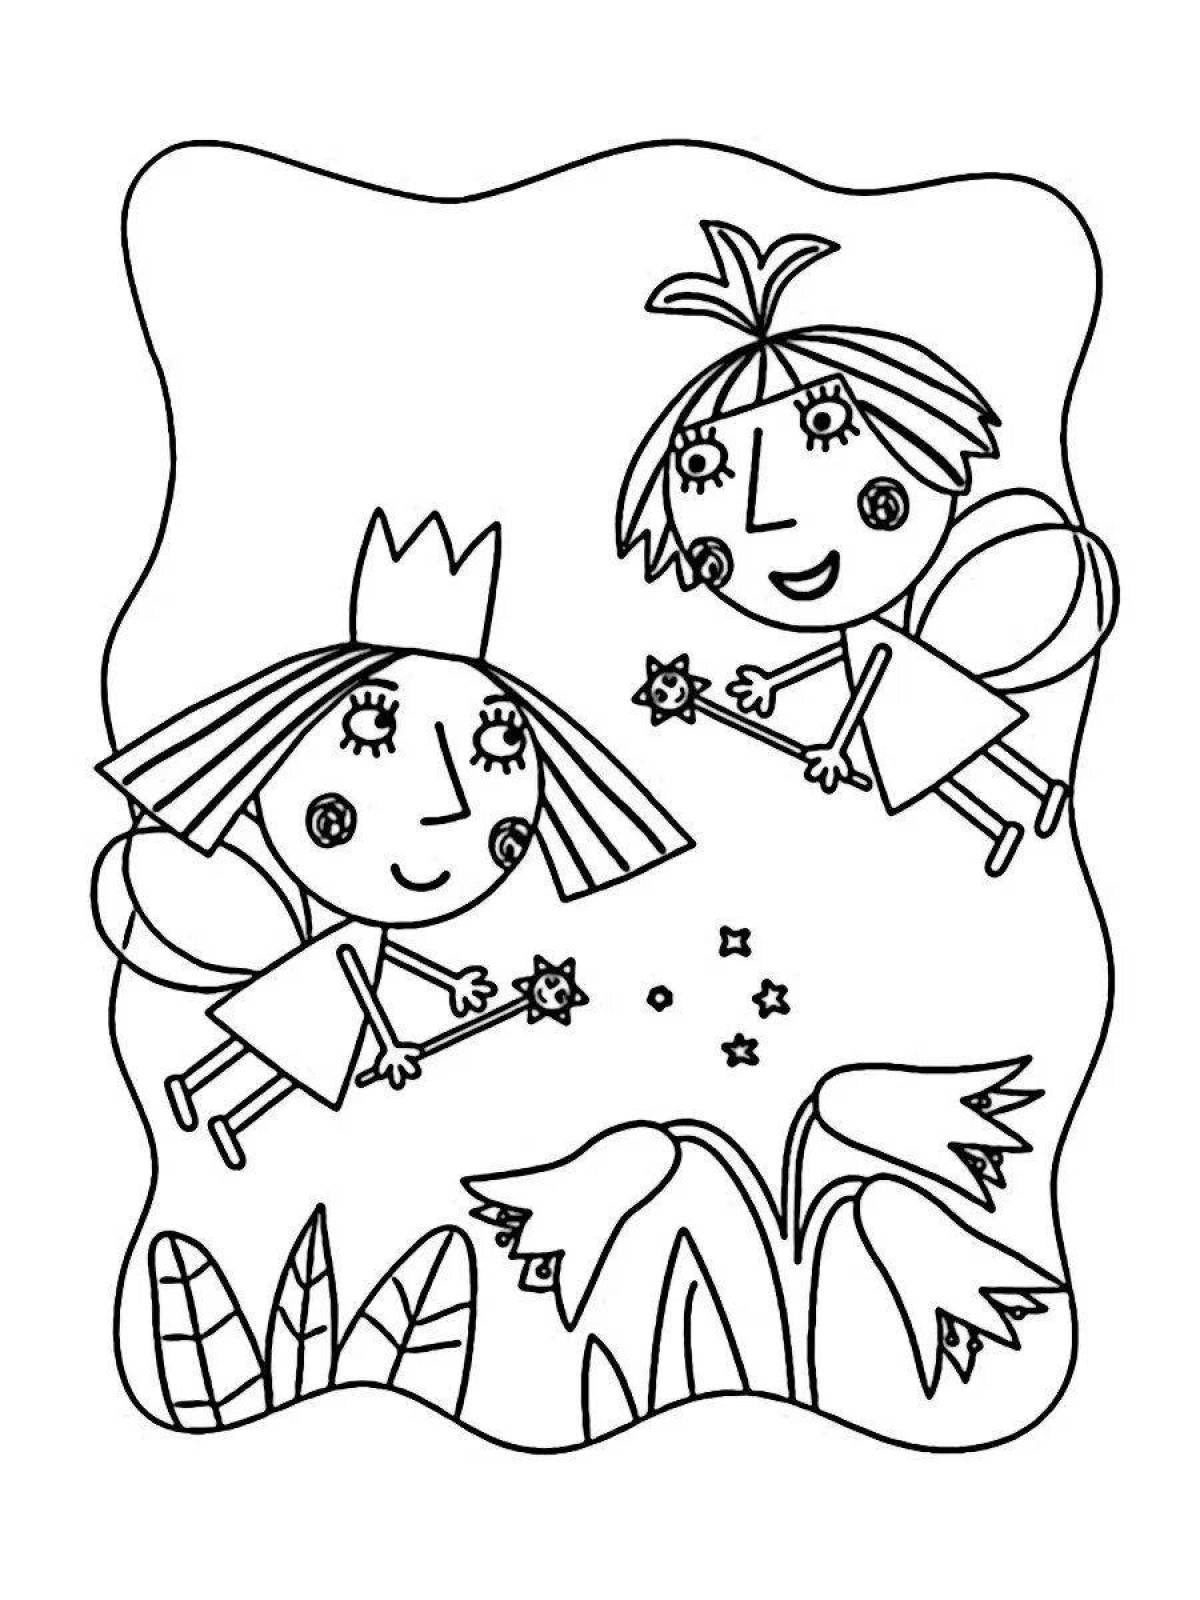 Ben and holly holiday coloring book